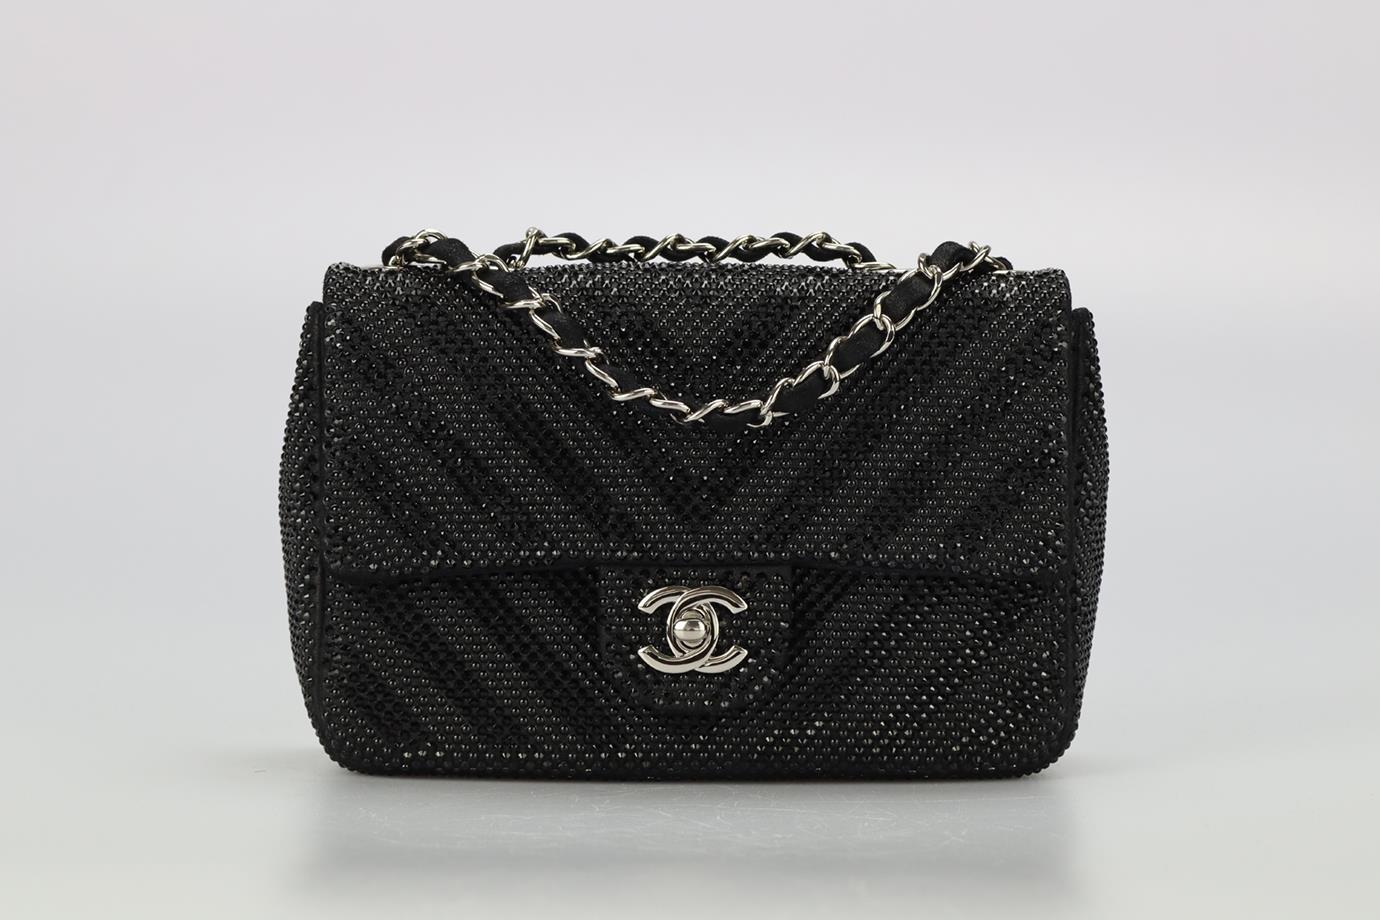 Chanel 2015 Classic Mini Rectangle Flap Strass Embellished Shoulder Bag. Black. Twist lock fastening - Front. Comes with - dustbag and authenticity card. Height: 5 in. Width: 7.8 in. Depth: 2.2 in. Handle drop: 12 in. Strap drop: 20.9 in. Condition: